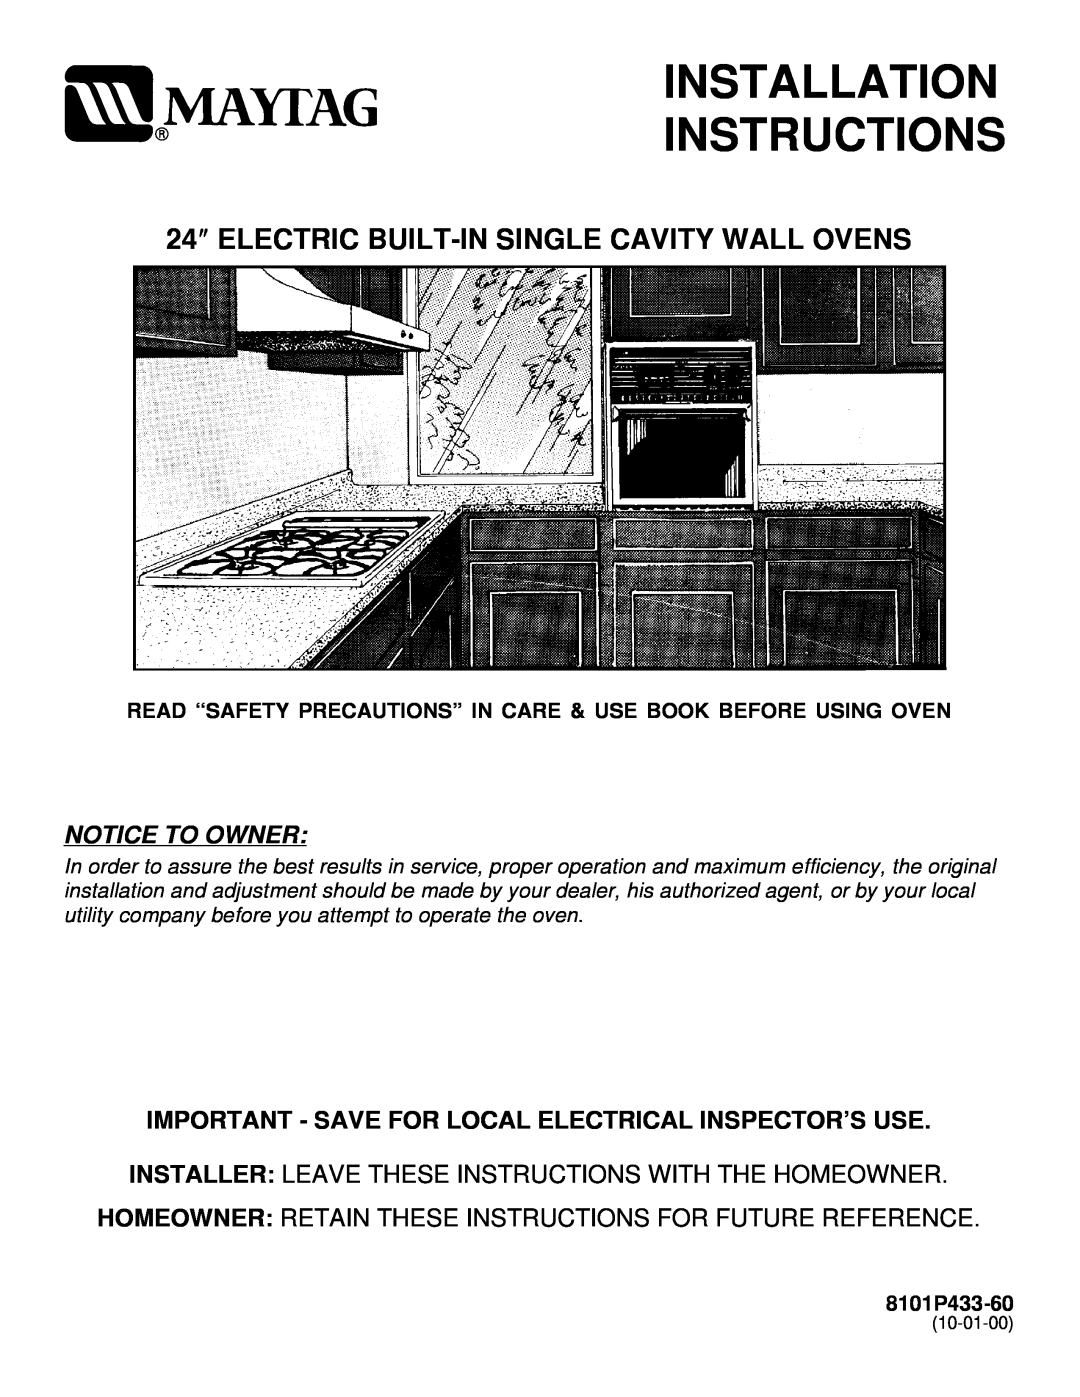 Maytag CWE4800ACE installation instructions Installation Instructions, Electric Built-In Single Cavity Wall Ovens 